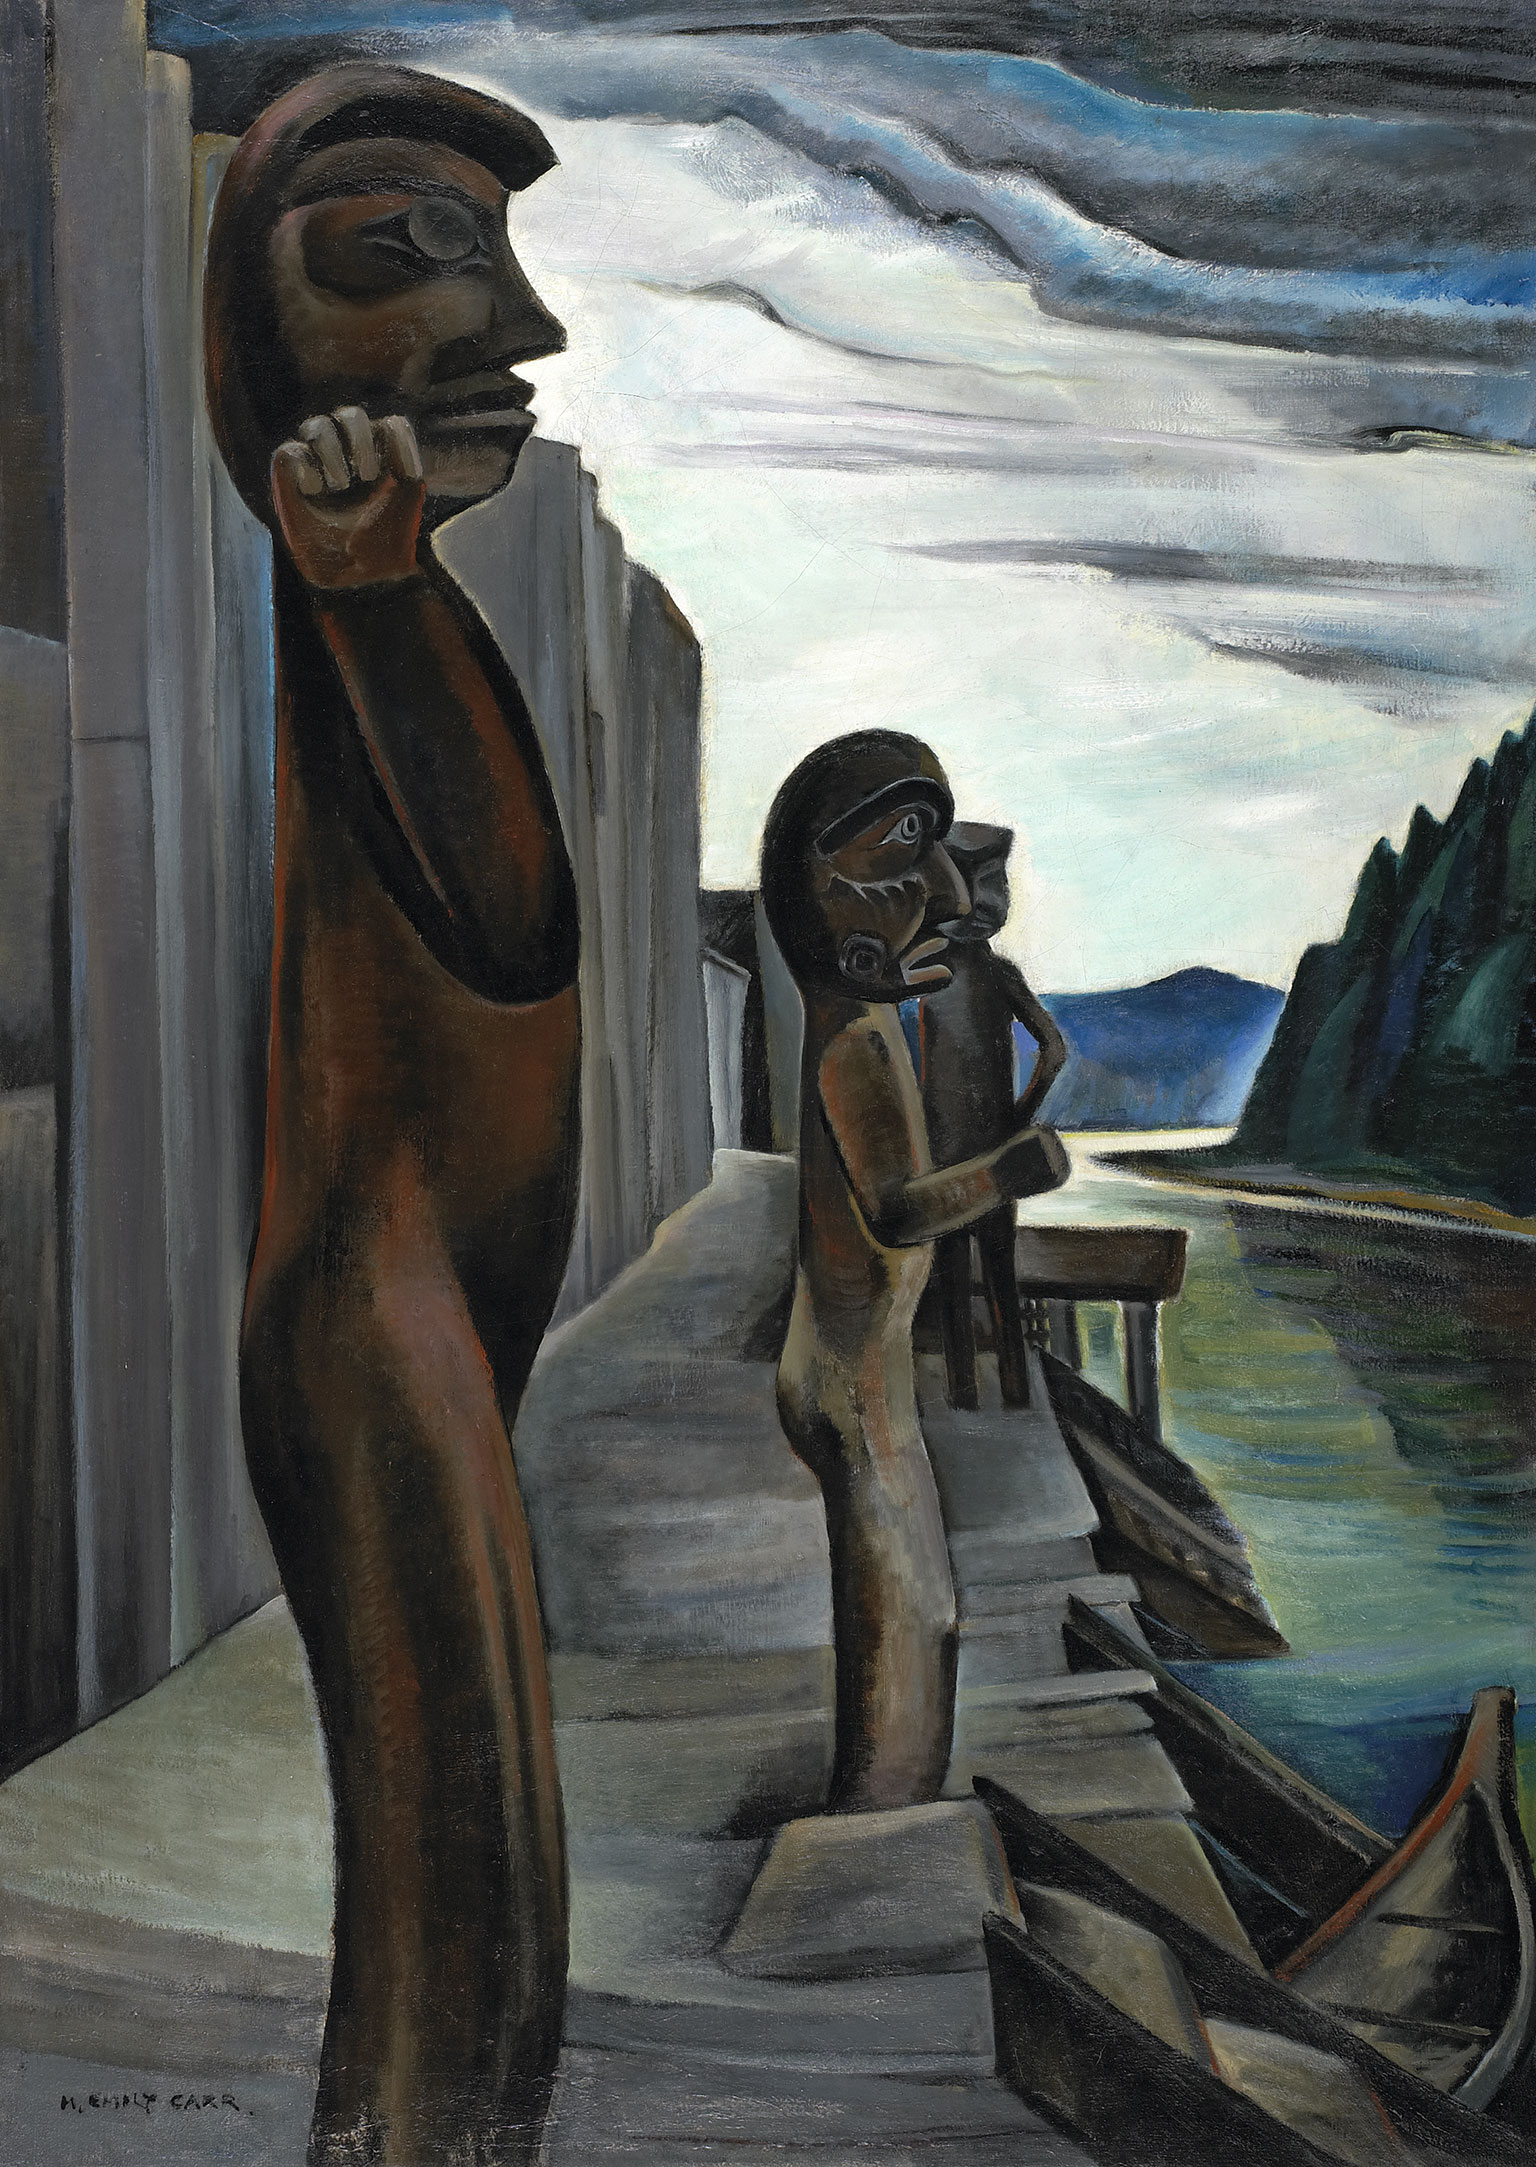 Painting by Emily Carr/courtesy of the National Gallery of Canada